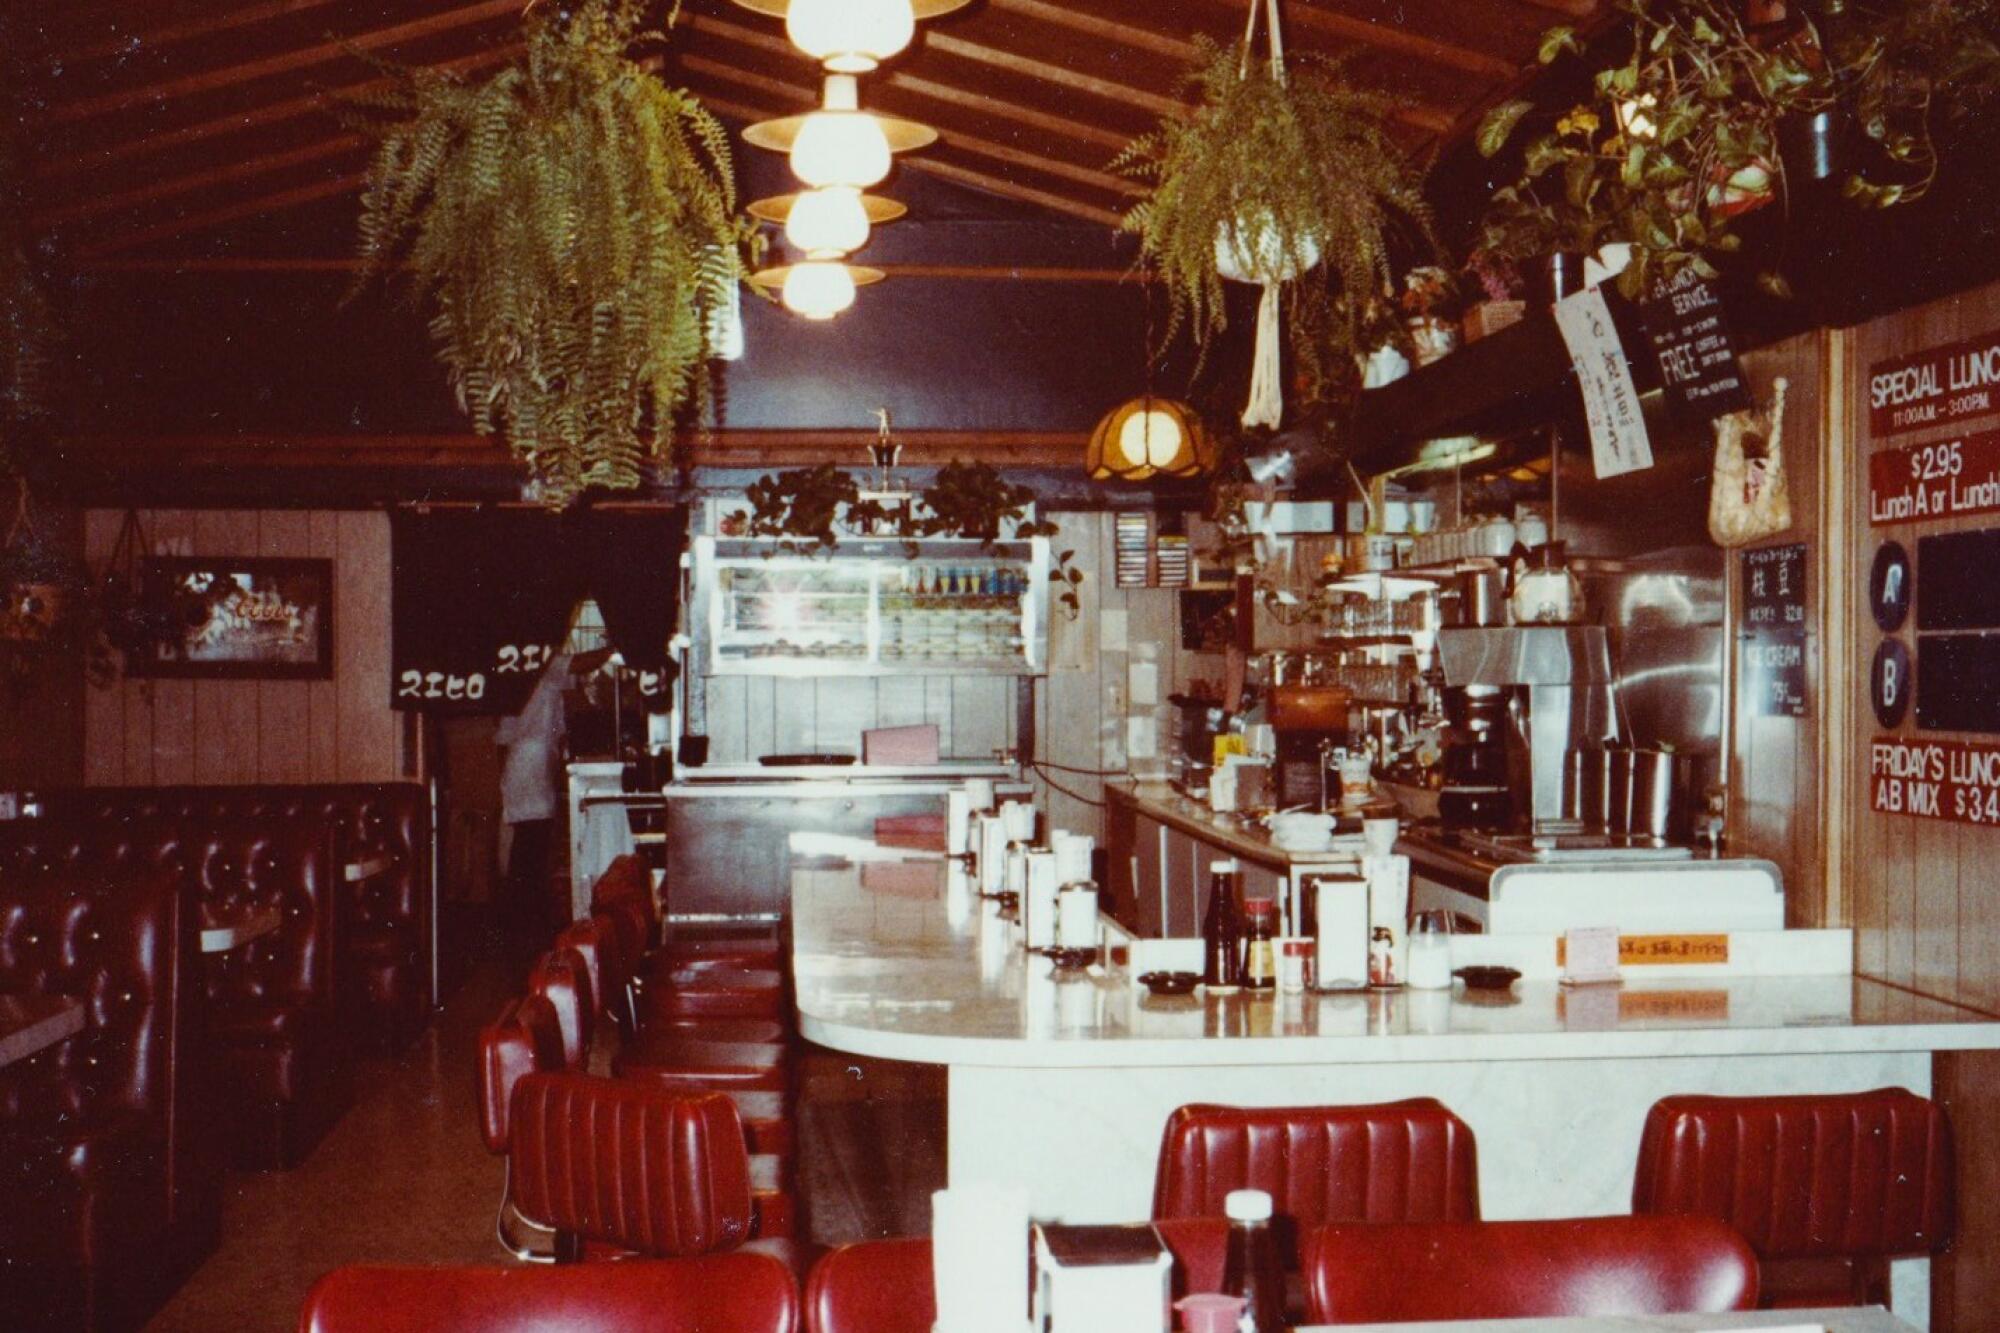 An interior photo of the original Suehiro Cafe on 2nd Street, showing the L-shaped bar.